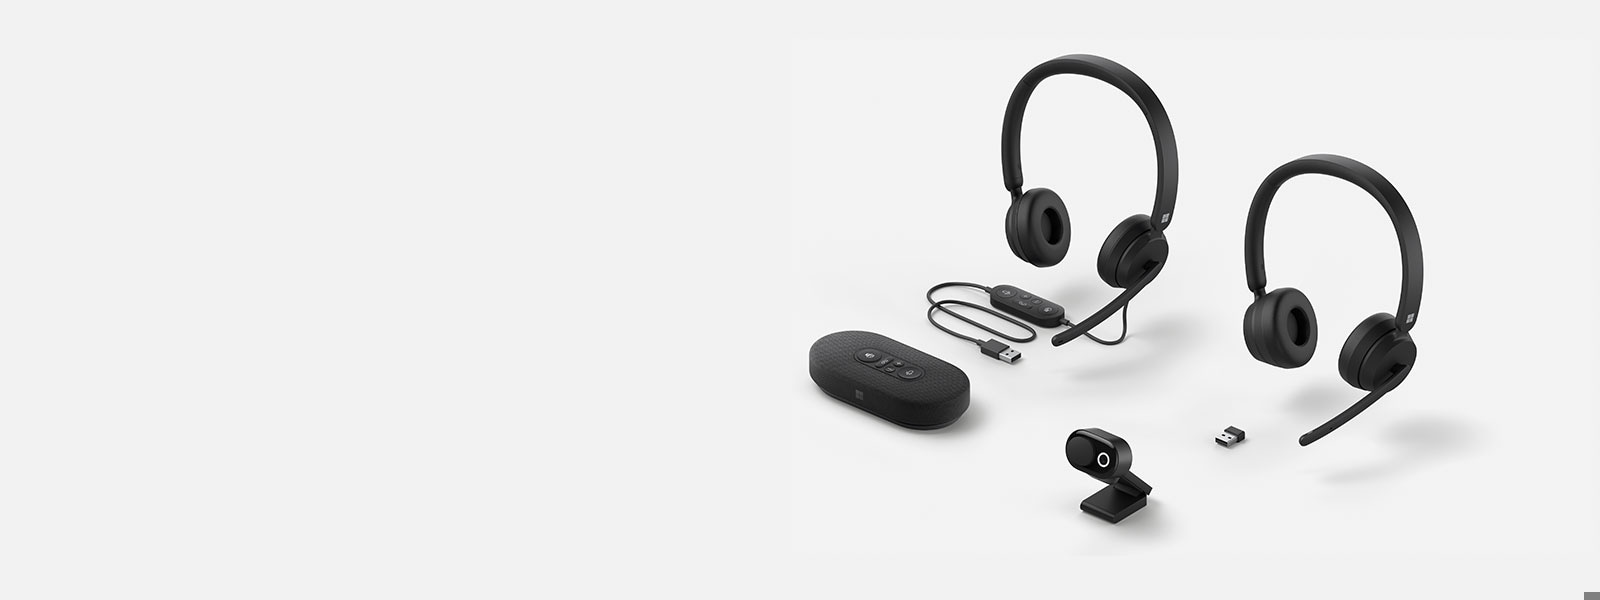 New Microsoft Accessories for Teams